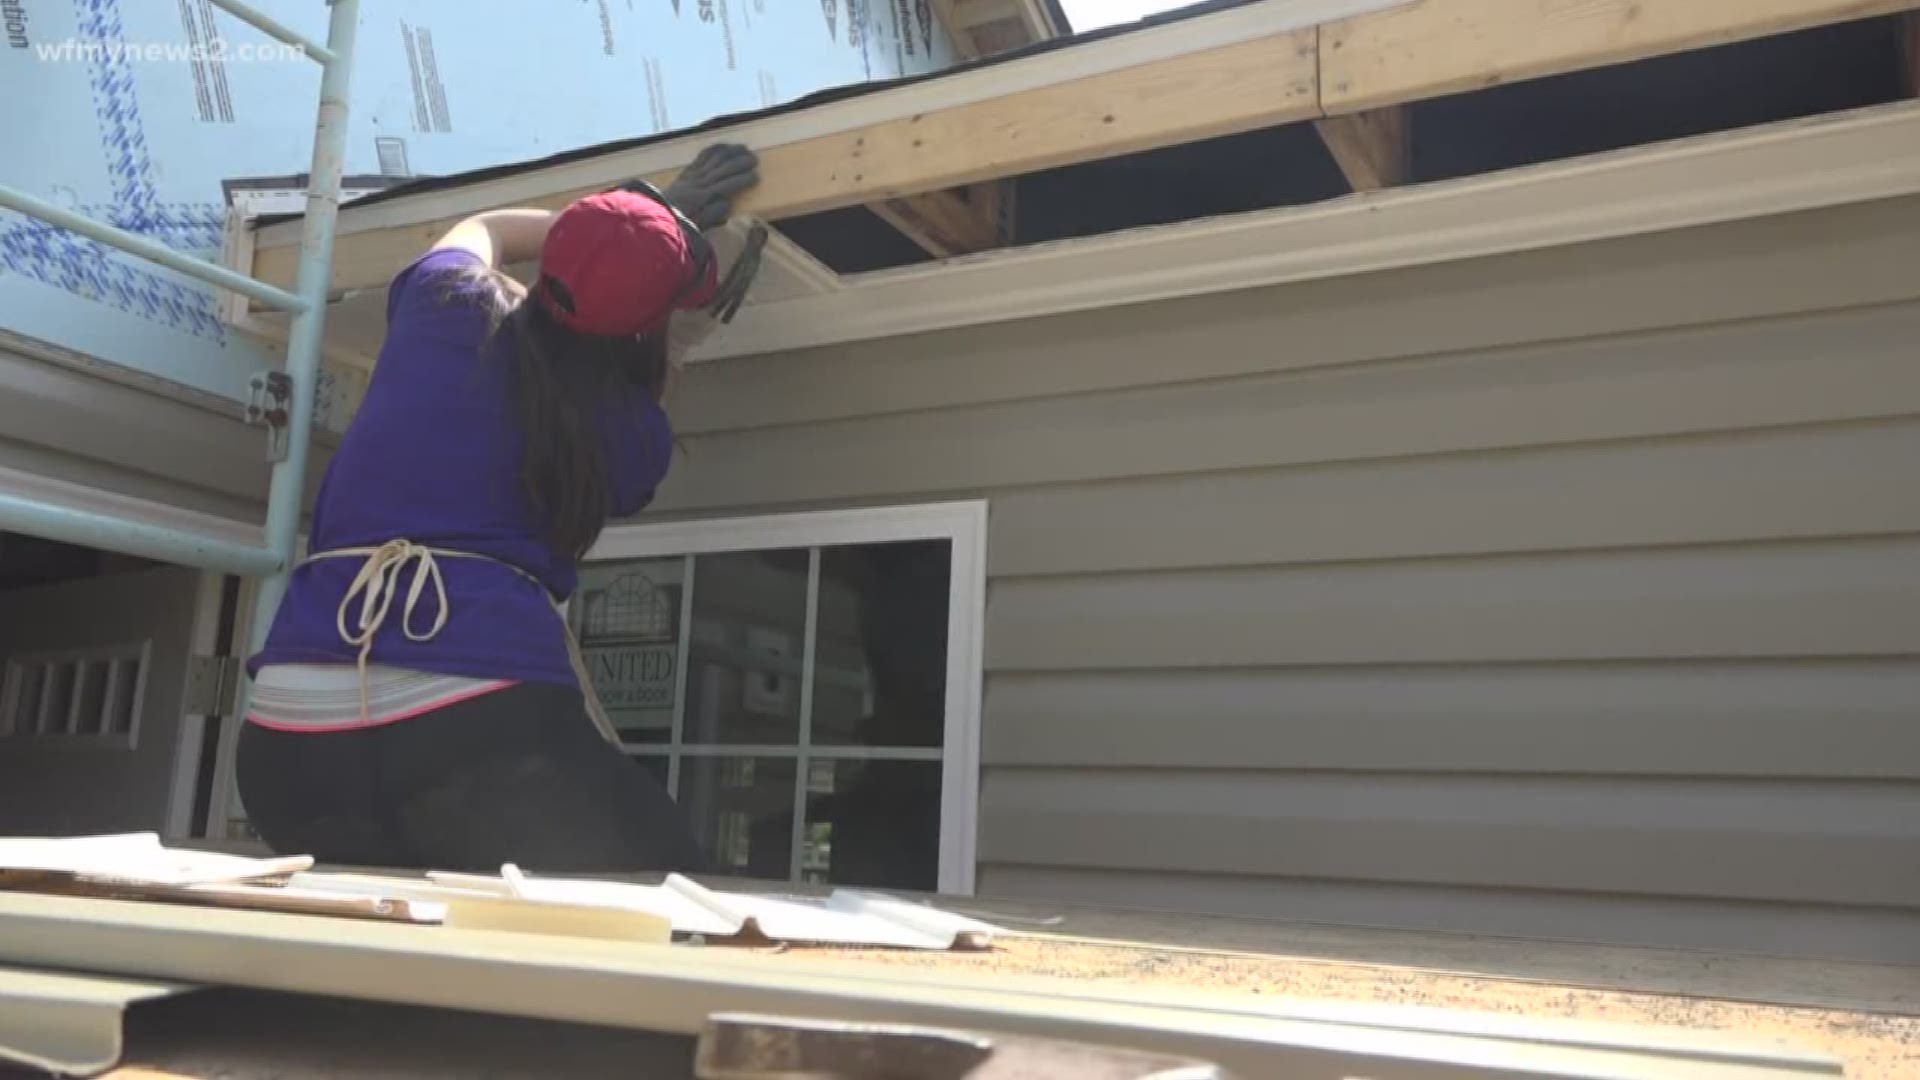 More than two dozen students from a college in Minnesota are spending their spring break building a house in Winston-Salem with Habitat for Humanity.